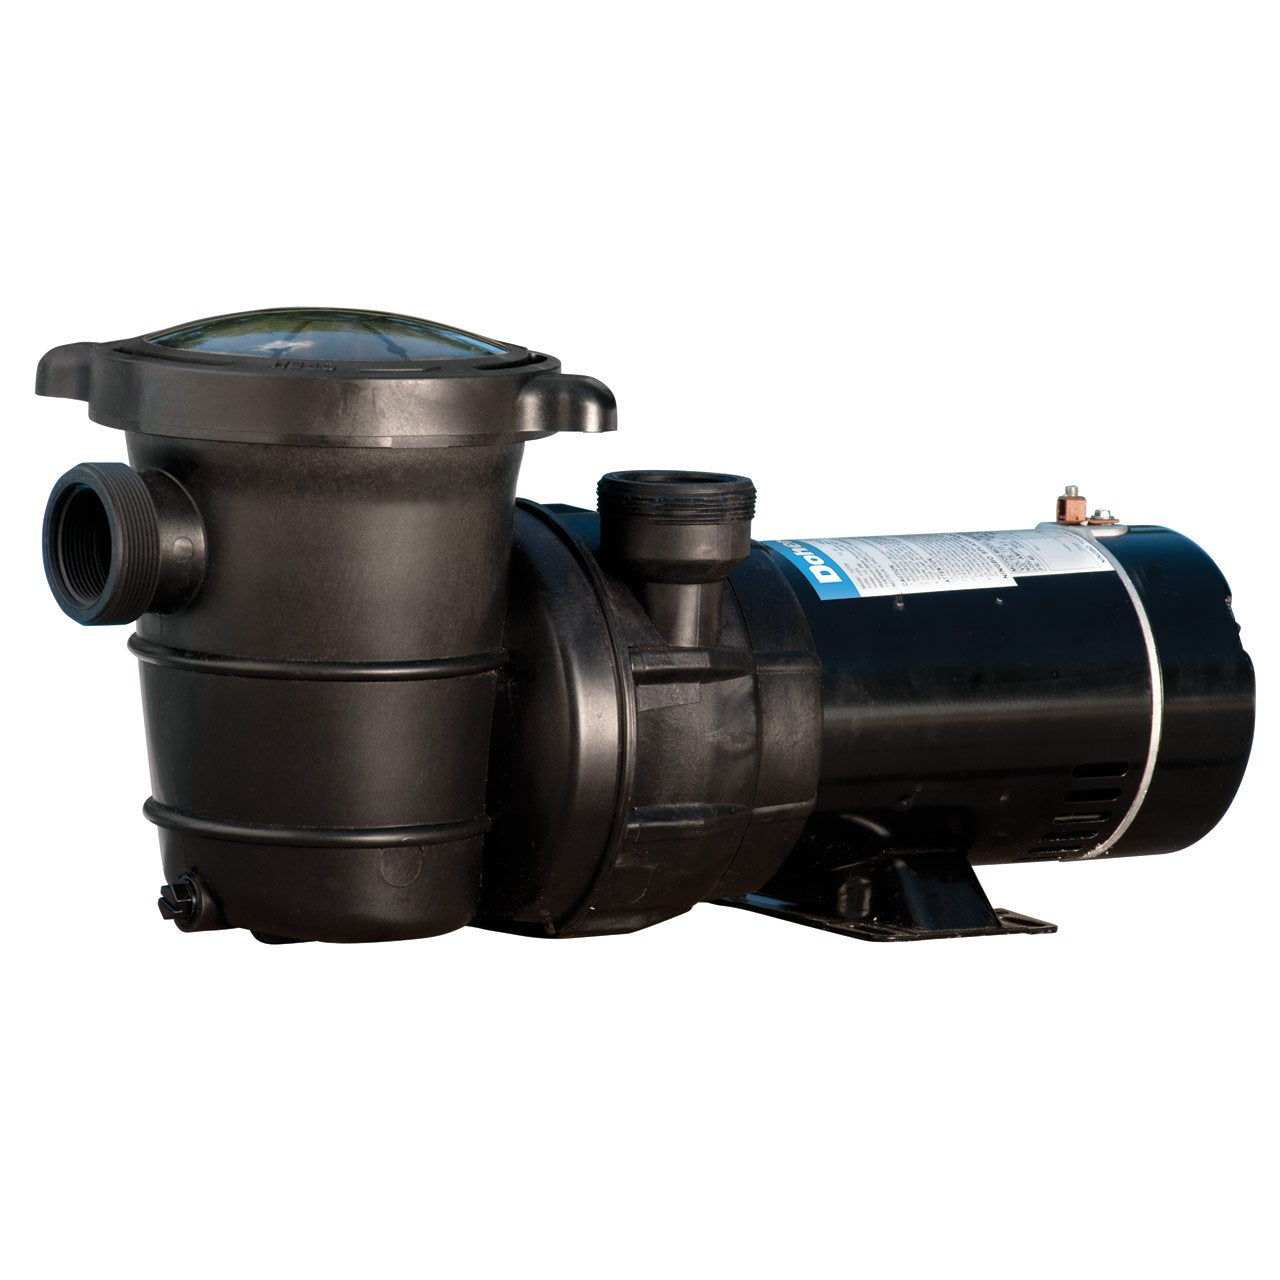 Doheny's Above Ground Pool Pro Swimming Pool Pumps | Above Ground 3/4 HP Pool Pump, 115V, 62 GPM | Updated Motors Have Lower Energy Consumption While Maintaining Equal Performance | .55 THP | 1.5 Inch Internal Threading And 2.5 Inch External Threading ...